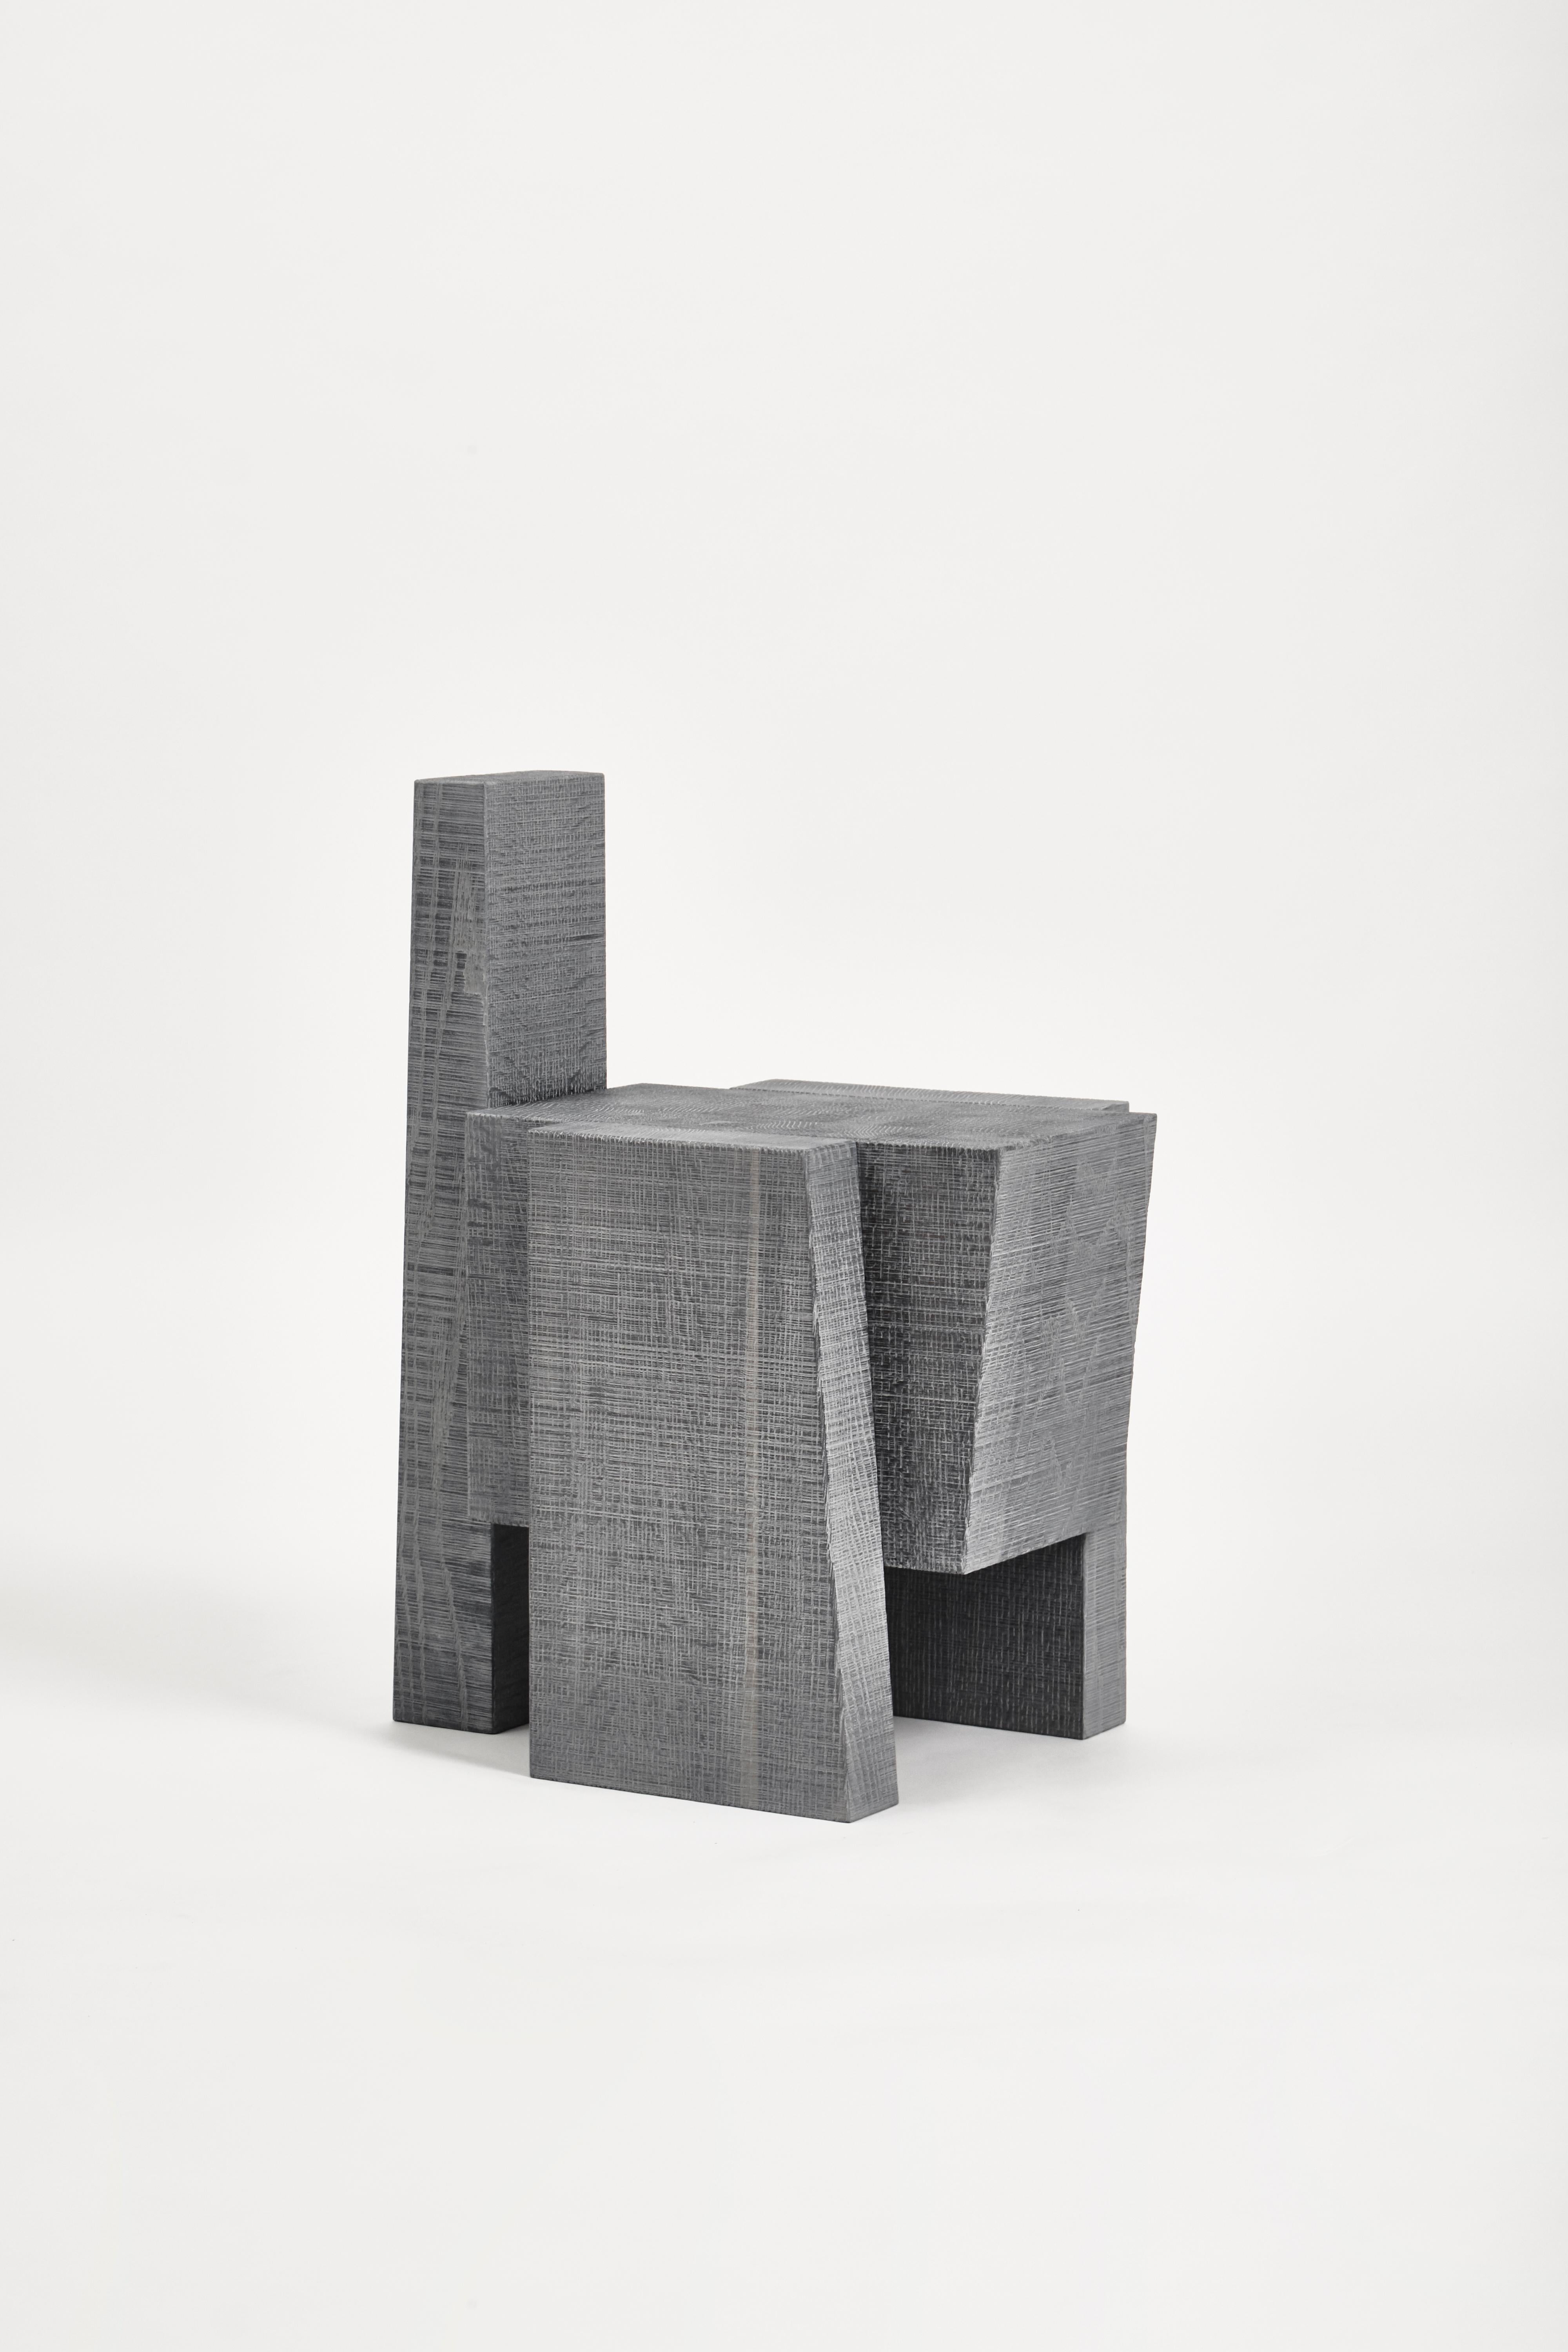 White layered oak wood stool I by Hyungshin Hwang.
Dimensions: D 33 x W 54 x H 69 cm.
Materials: oxidized red oak.

Layered Series is the main theme and concept of work of Hwang, who continues his experiment which is based on architectural